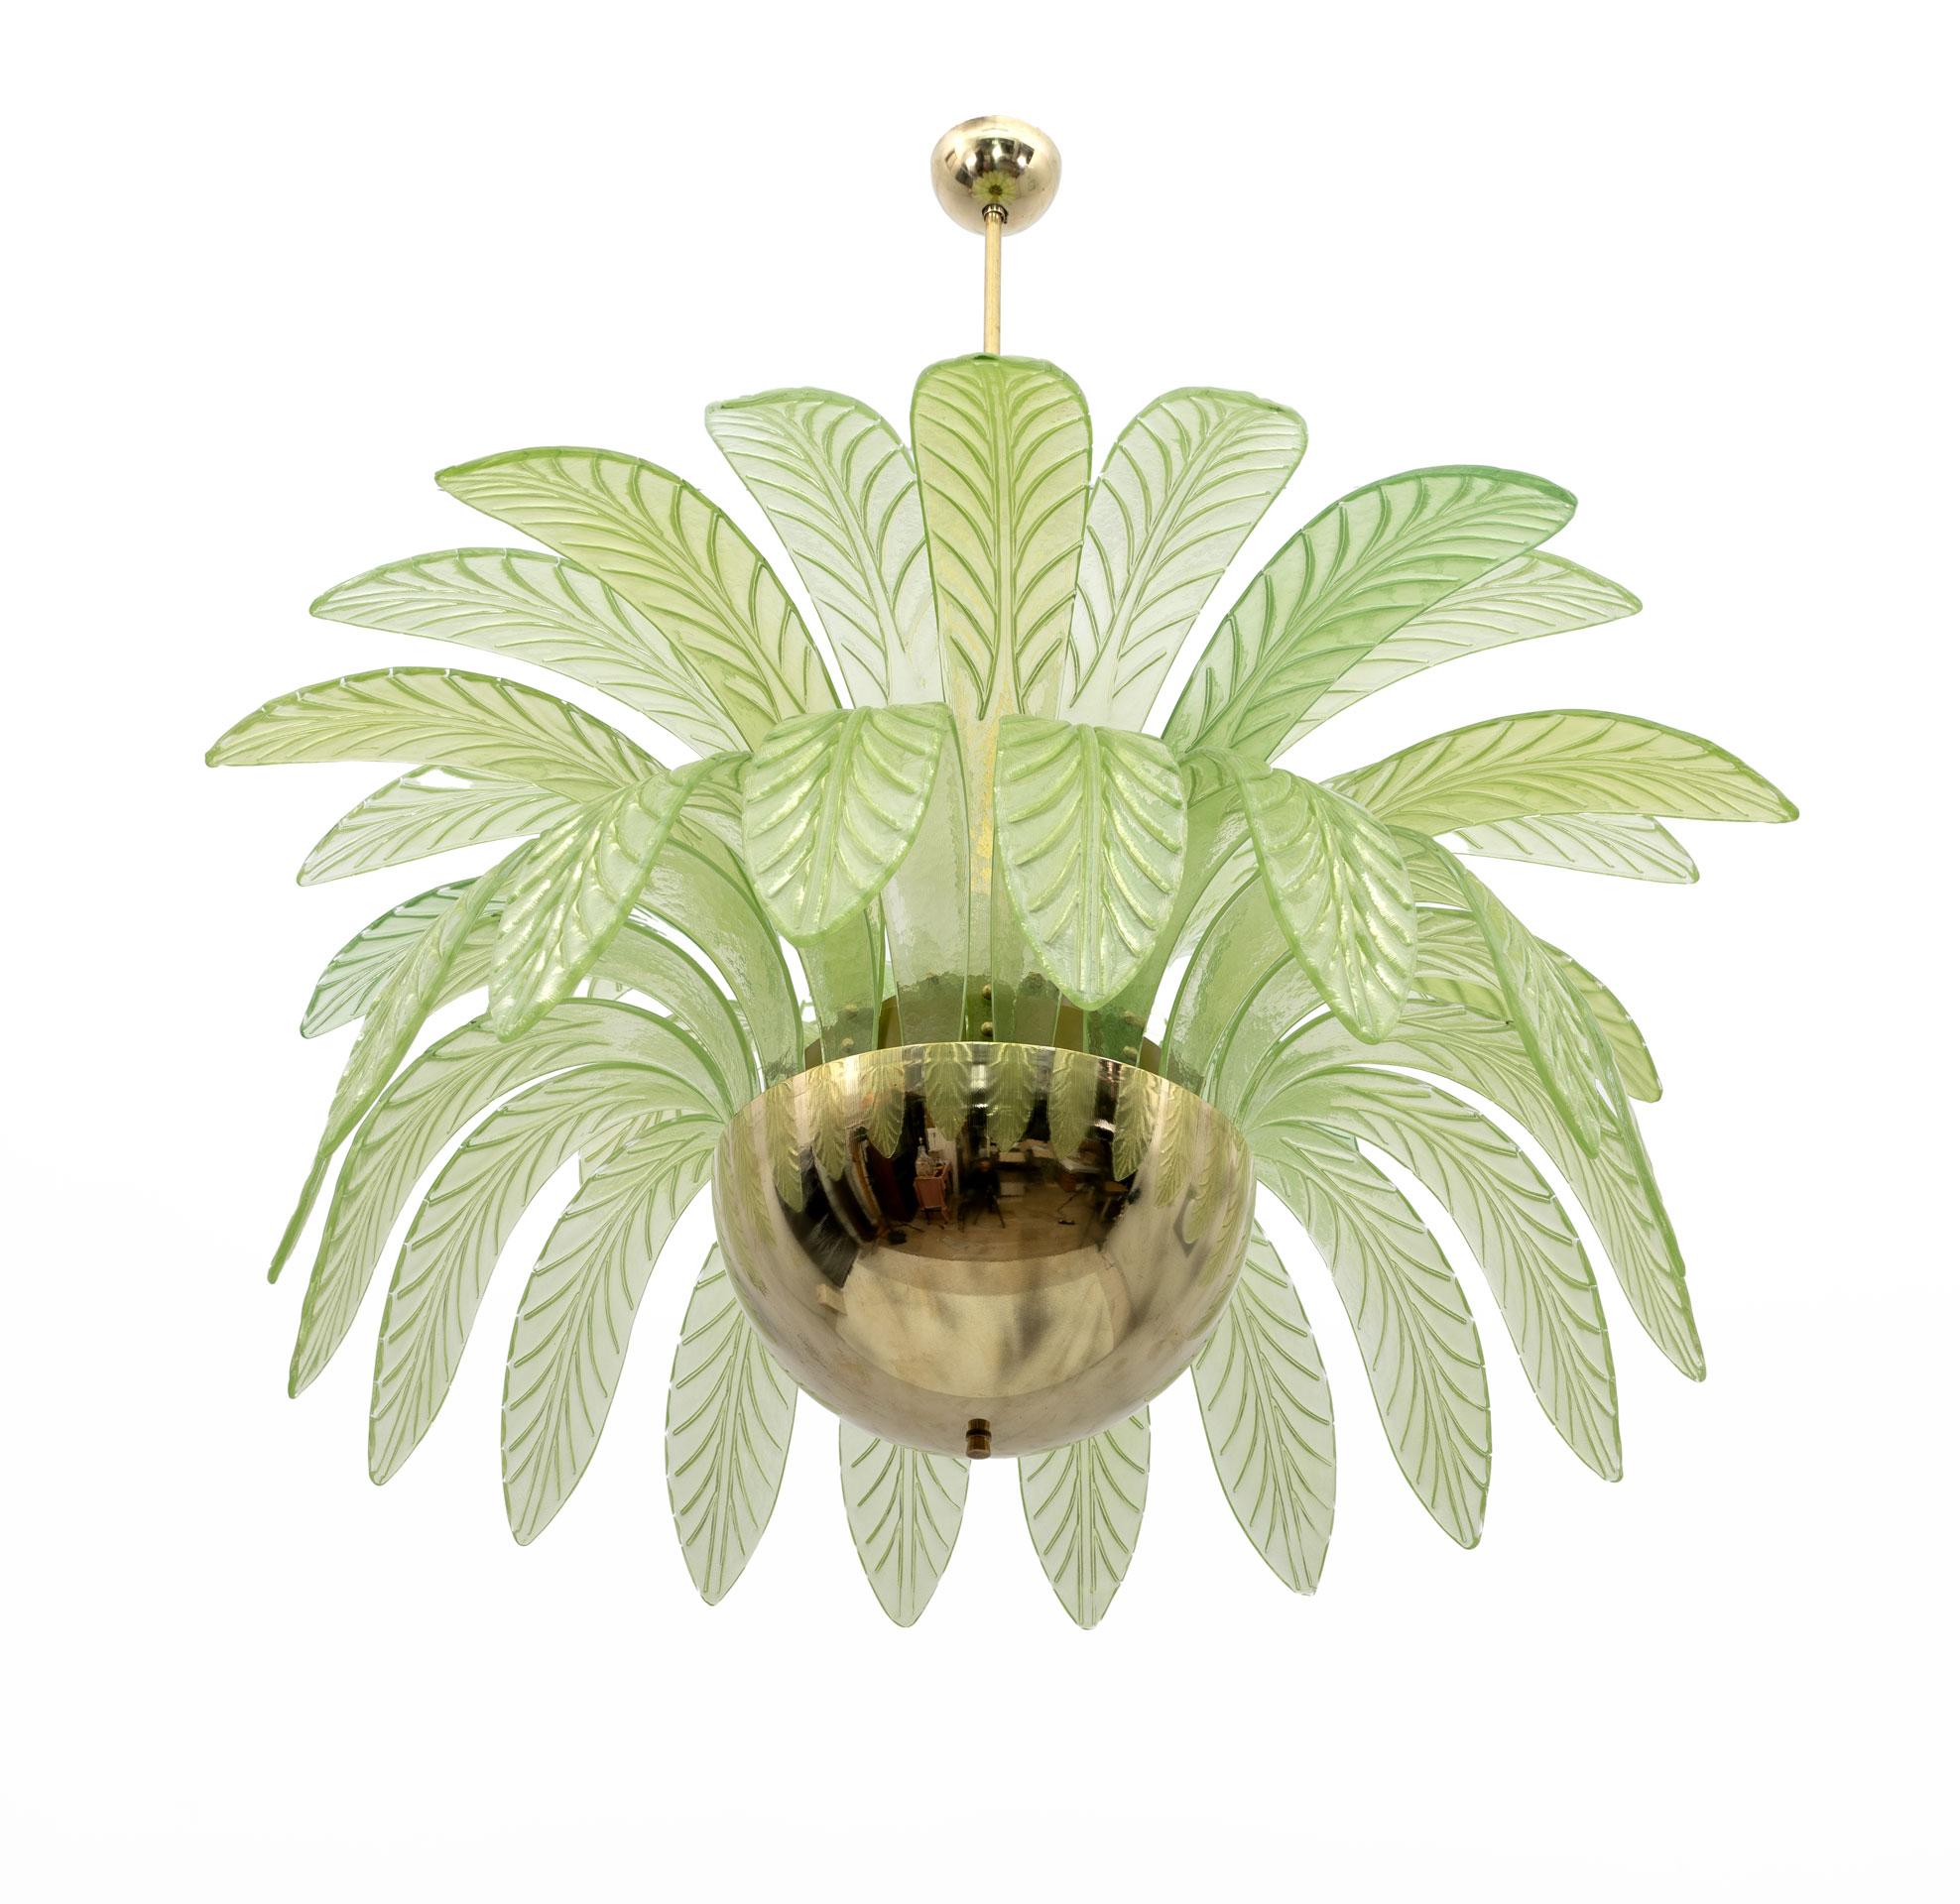 Large mouth-blown Murano glass chandelier, 38 green Murano glass leaves, brass structure, 12 bulbs. The chandelier reproduces the crown of a palm tree. We supply reducers for E12 USA bulbs. The minimum height, if you want to shorten the brass rod,